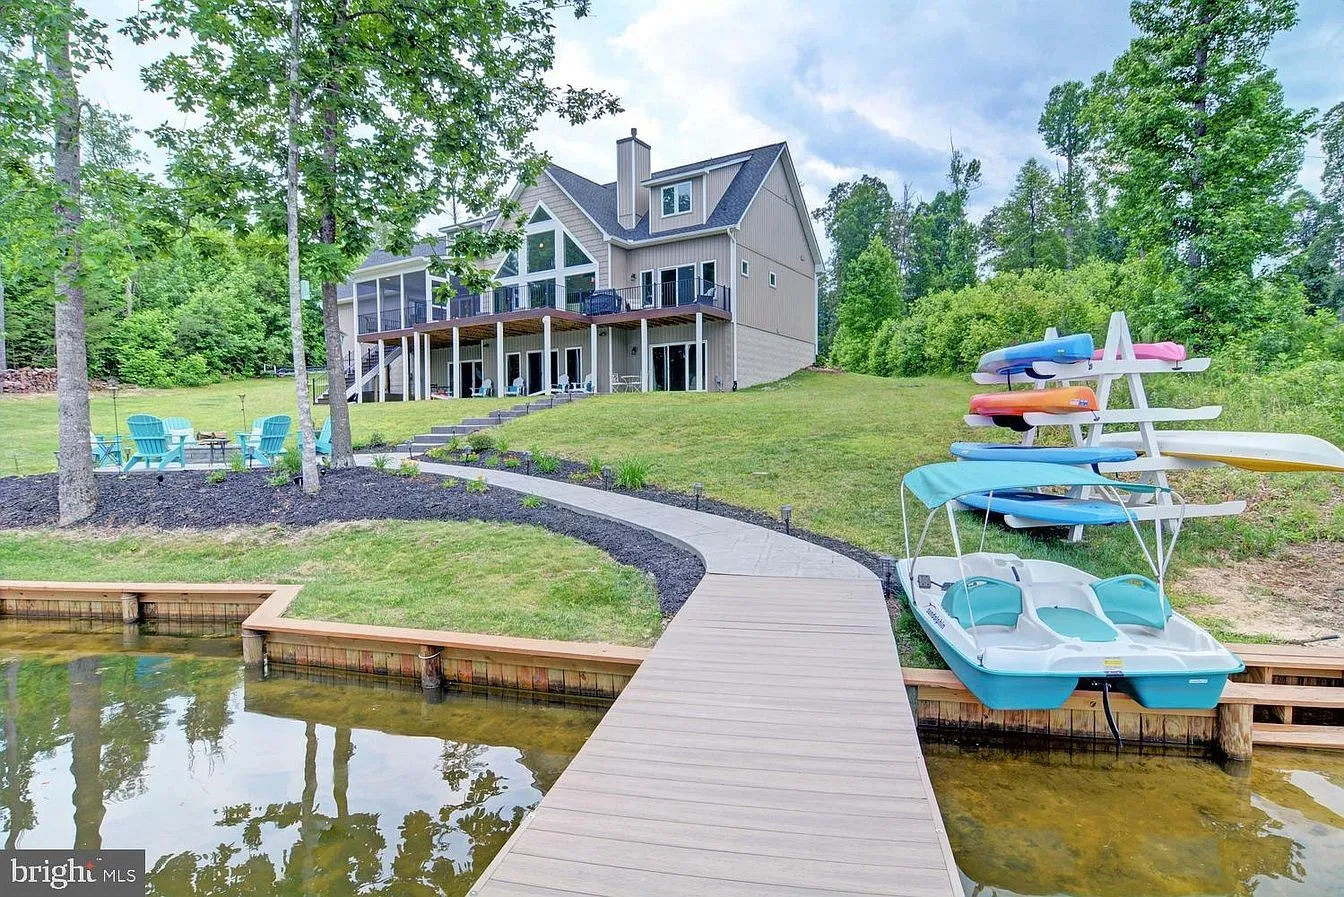 Two-story, house with floor to ceiling back windows, and a path leading to a dock along a lake with a paddle boat docked nearby